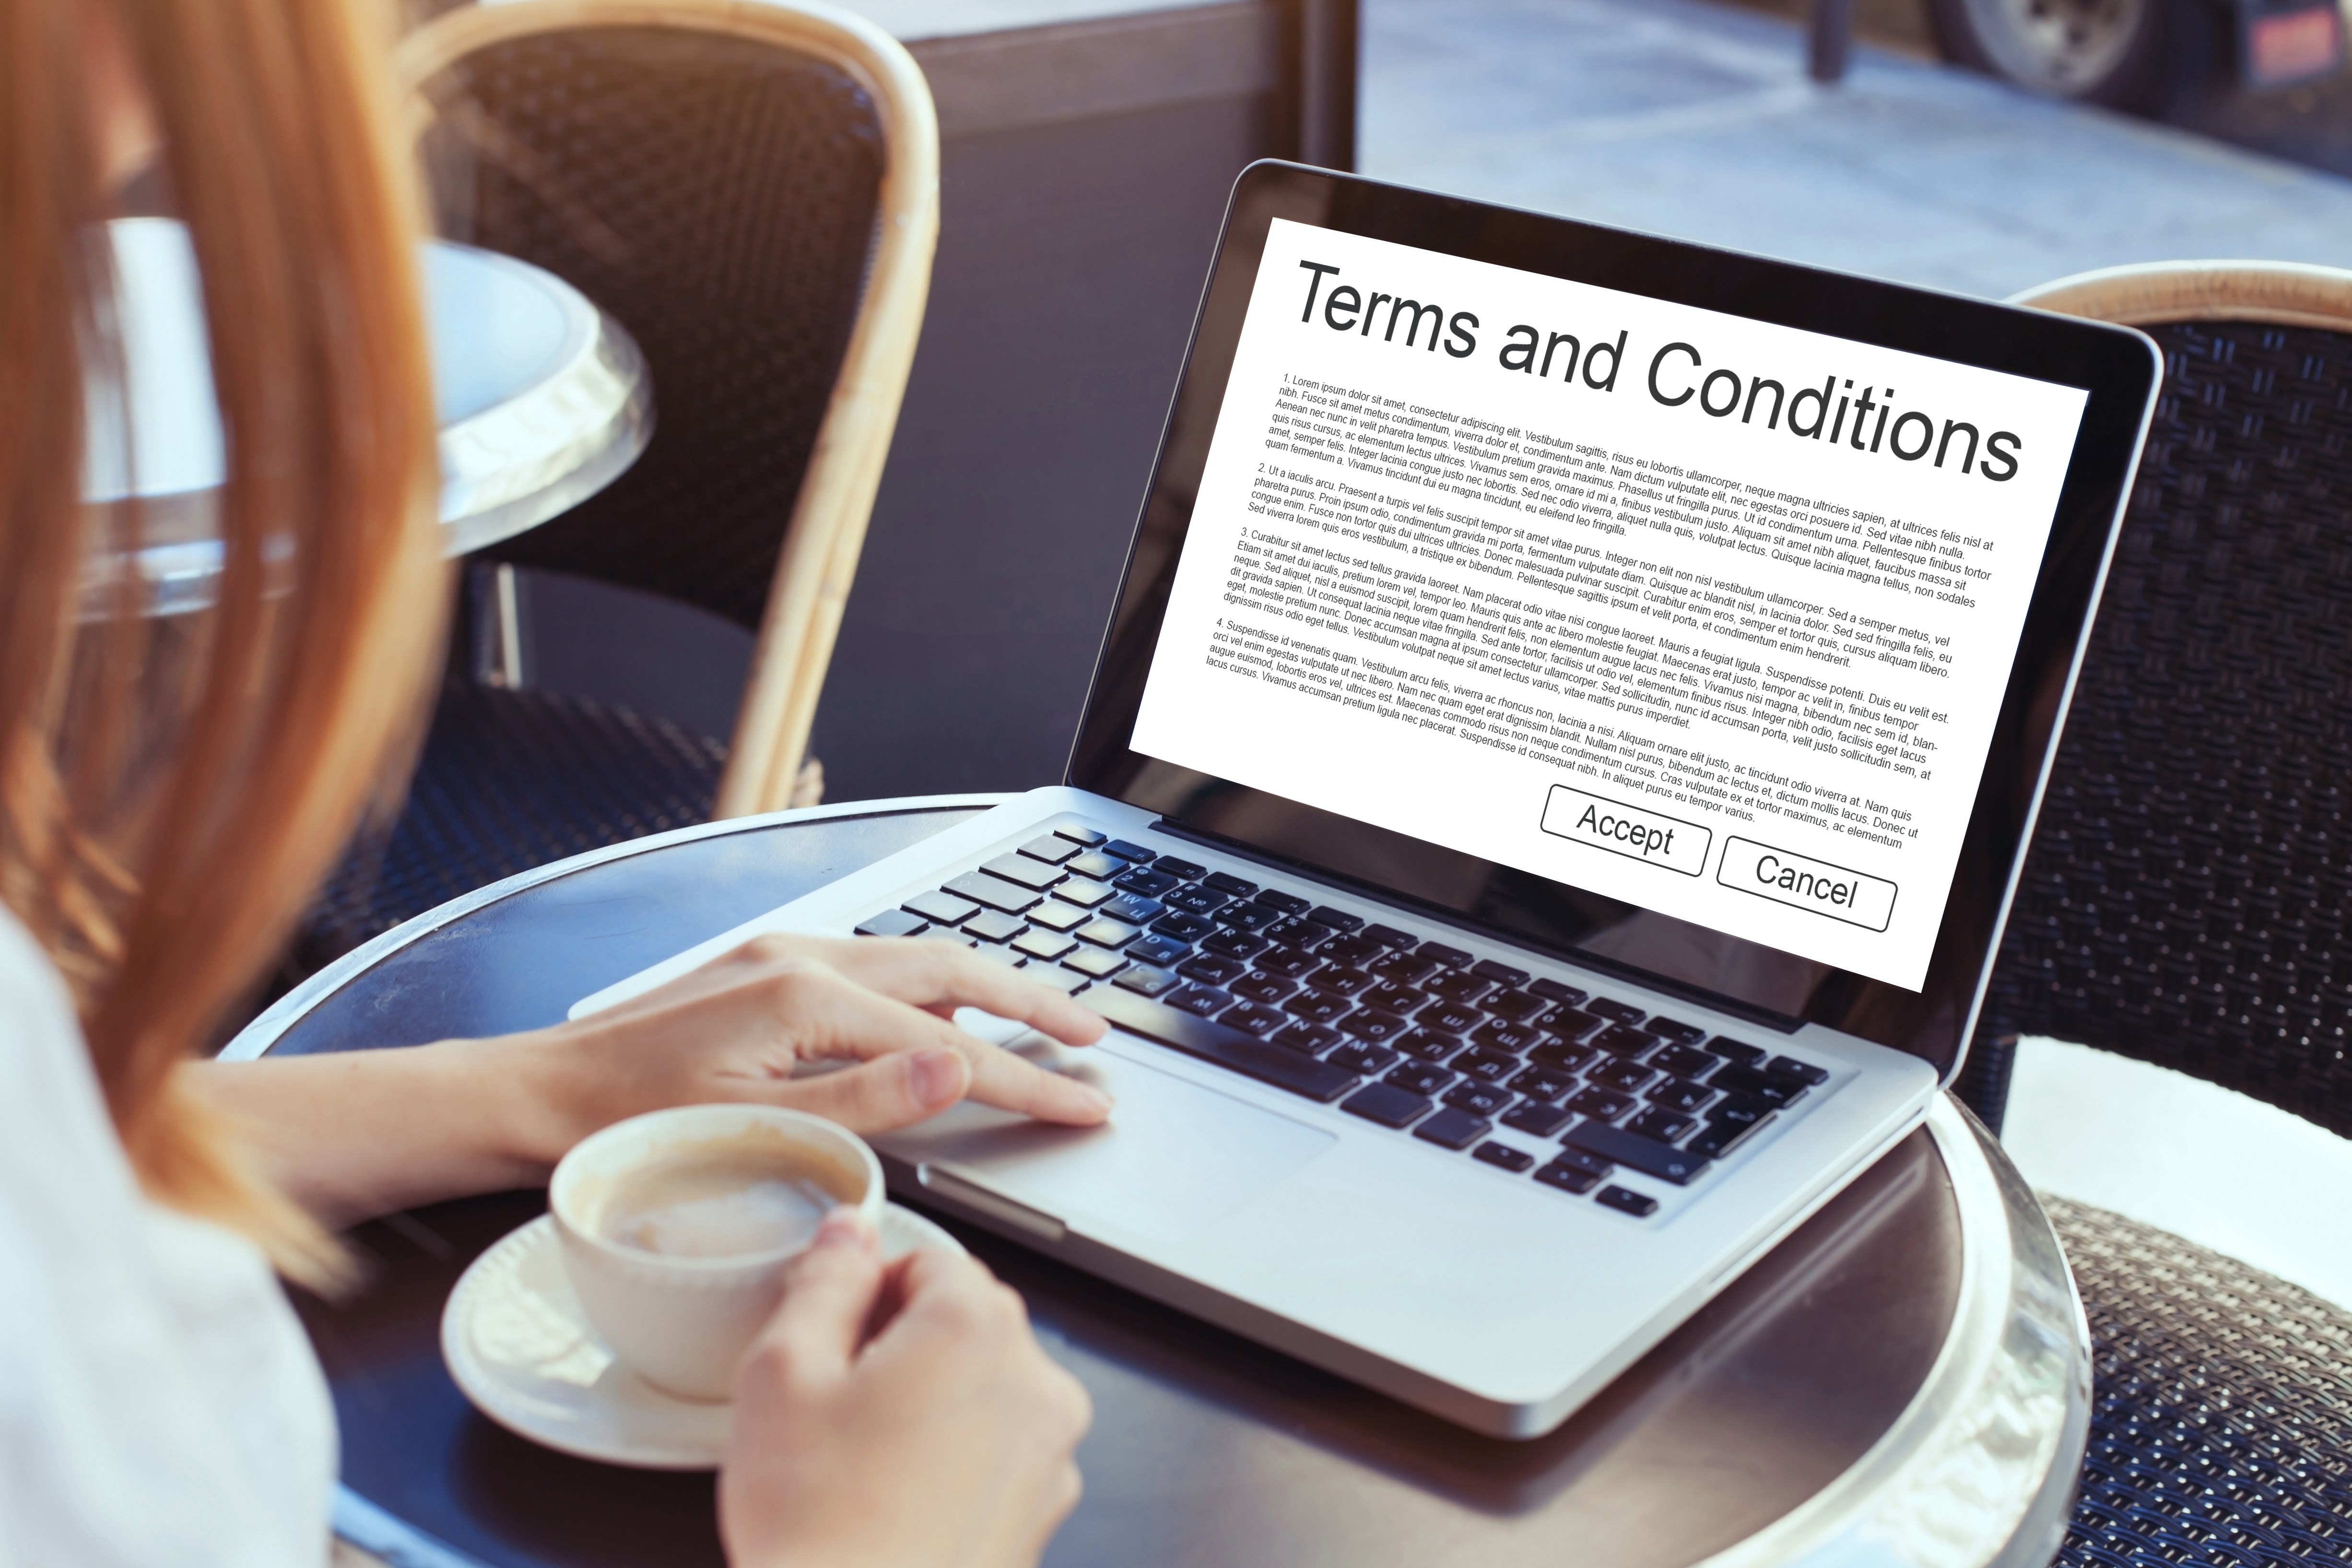 Terms and conditions of use is the concept on the screen of computer. (iStock)